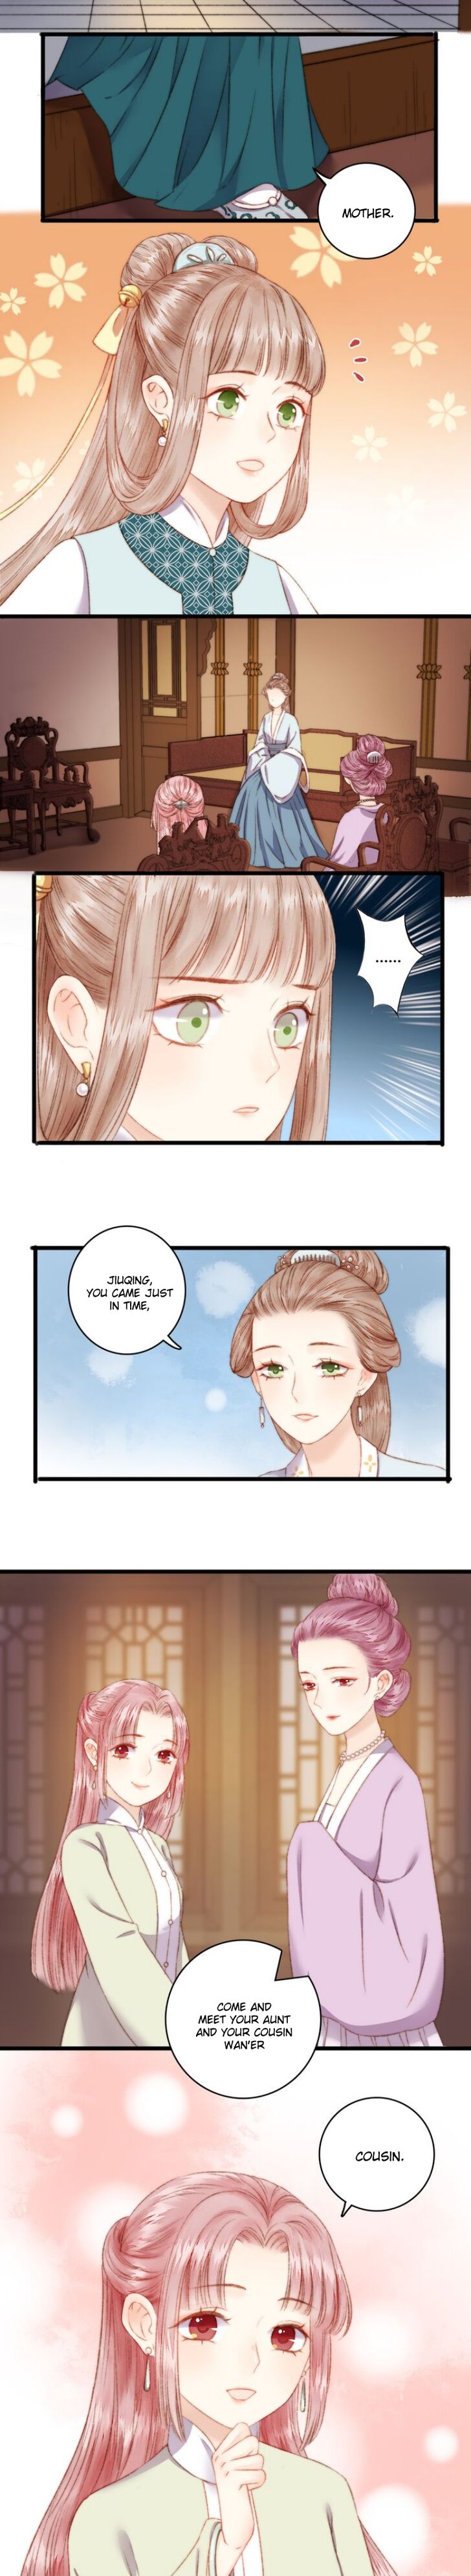 The Goddess of Healing chapter 5